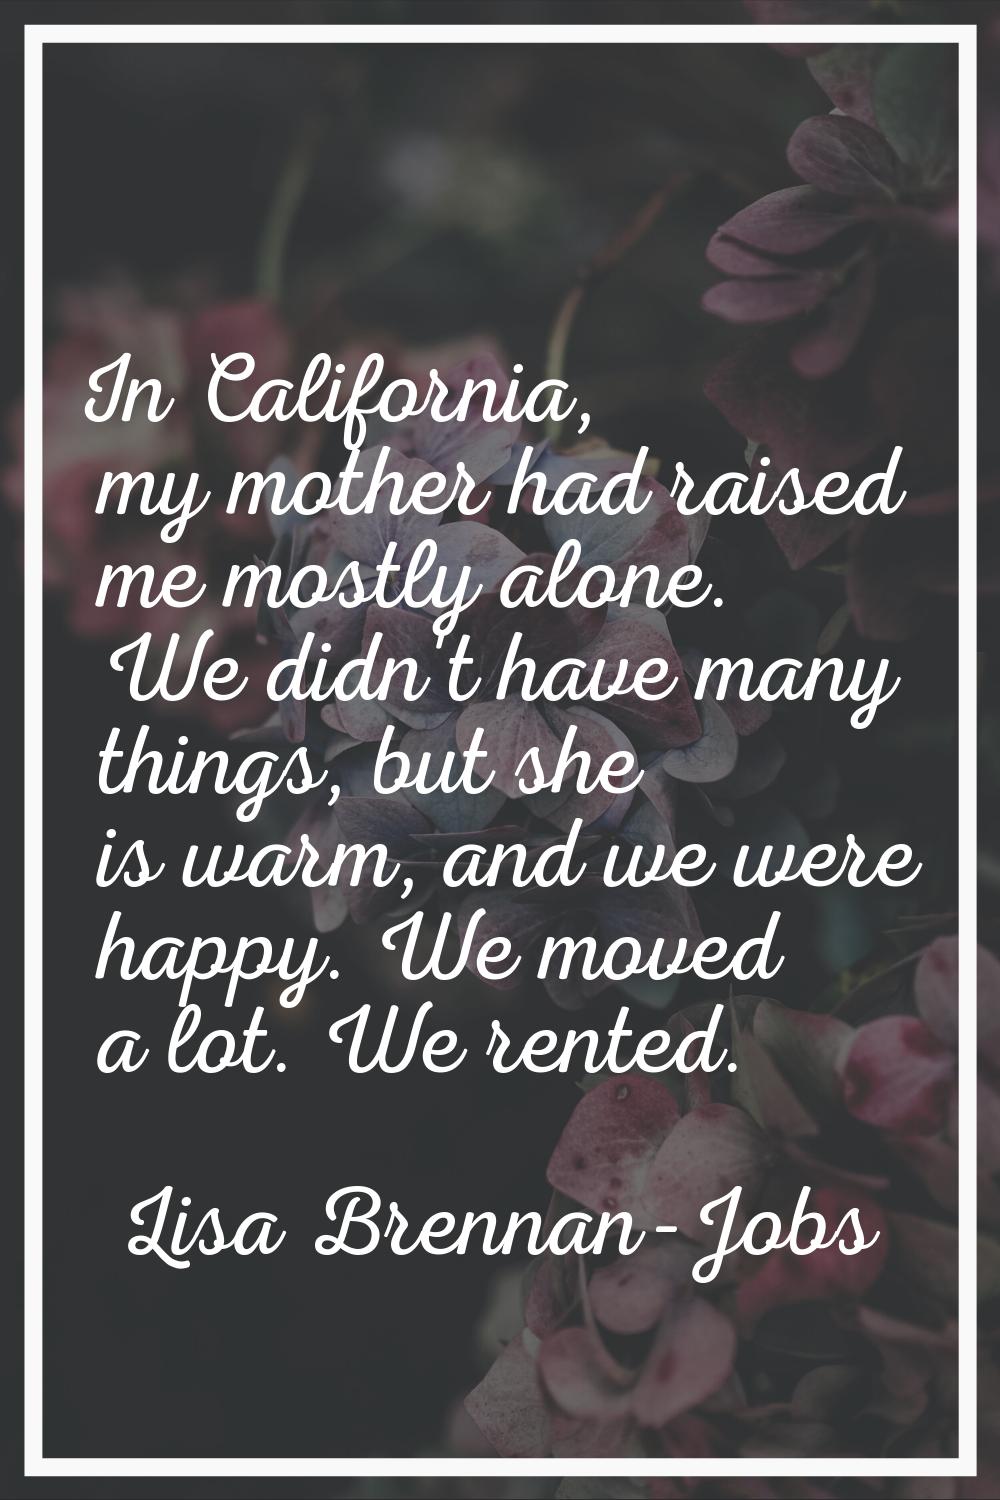 In California, my mother had raised me mostly alone. We didn't have many things, but she is warm, a